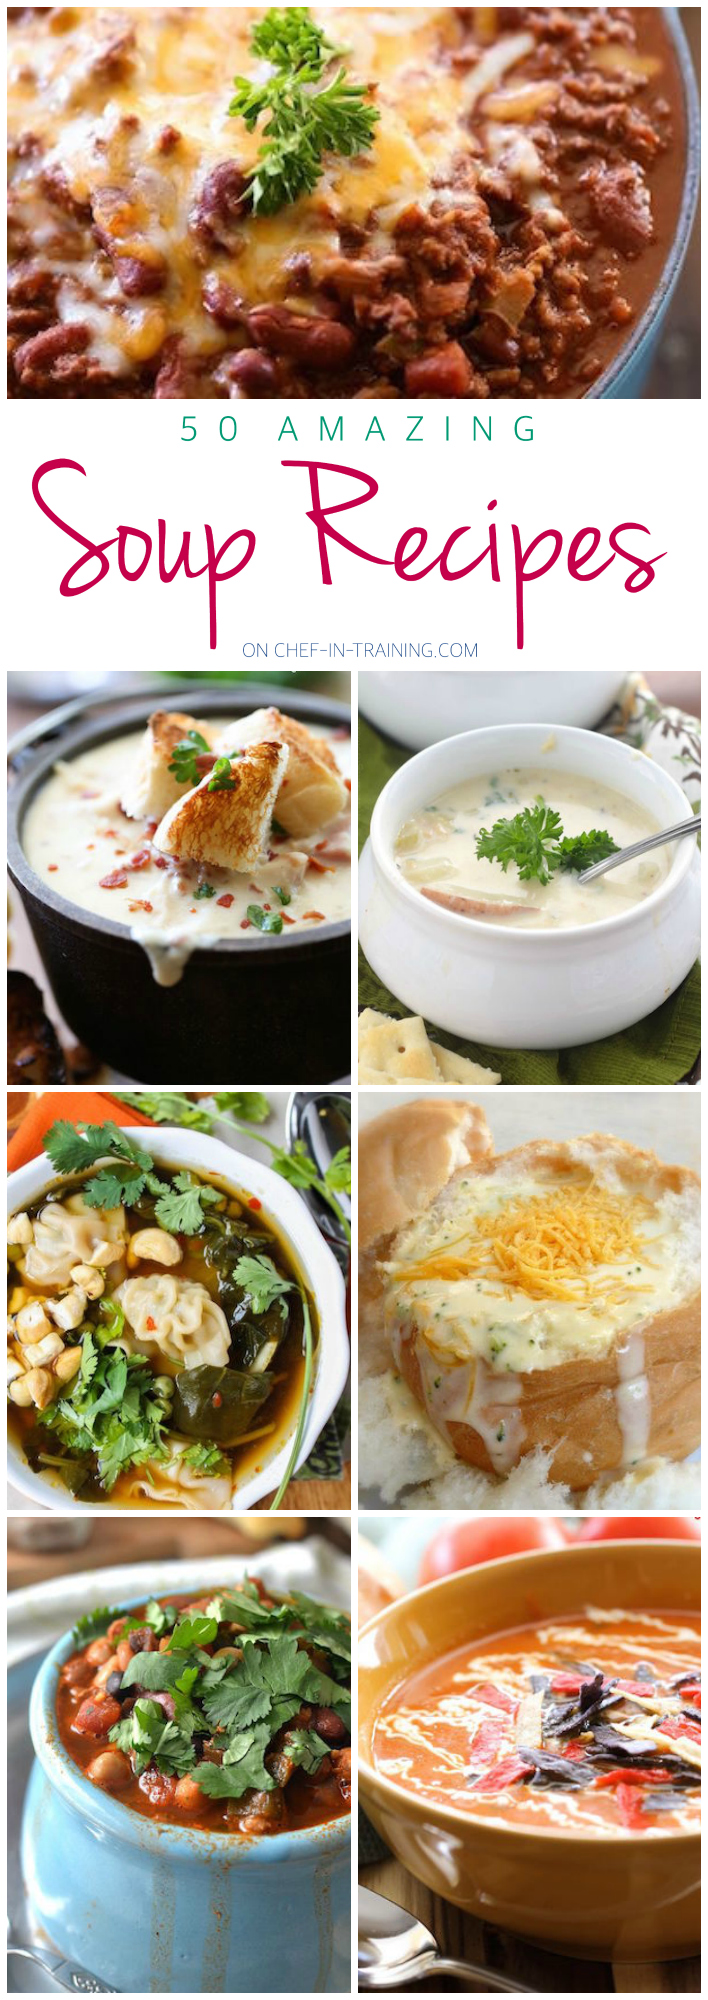 50 Amazing Soup Recipes at chef-in-training.com ...SO many unique and delicious options to choose from! The perfect round up for colder days!